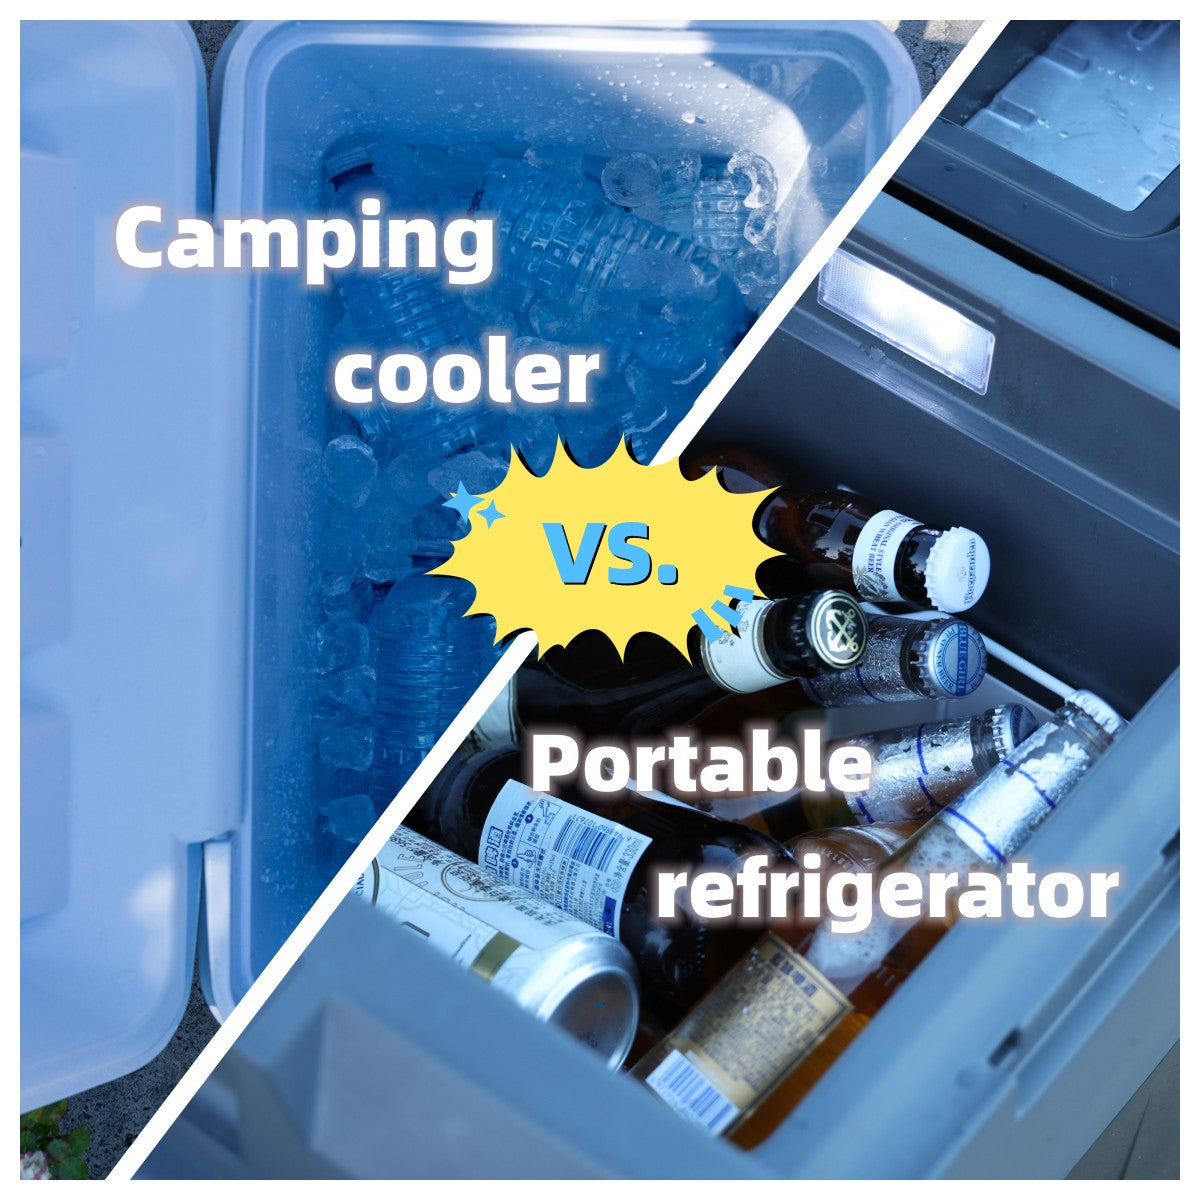 Camping Cooler vs. Portable Refrigerator| Which is Better?